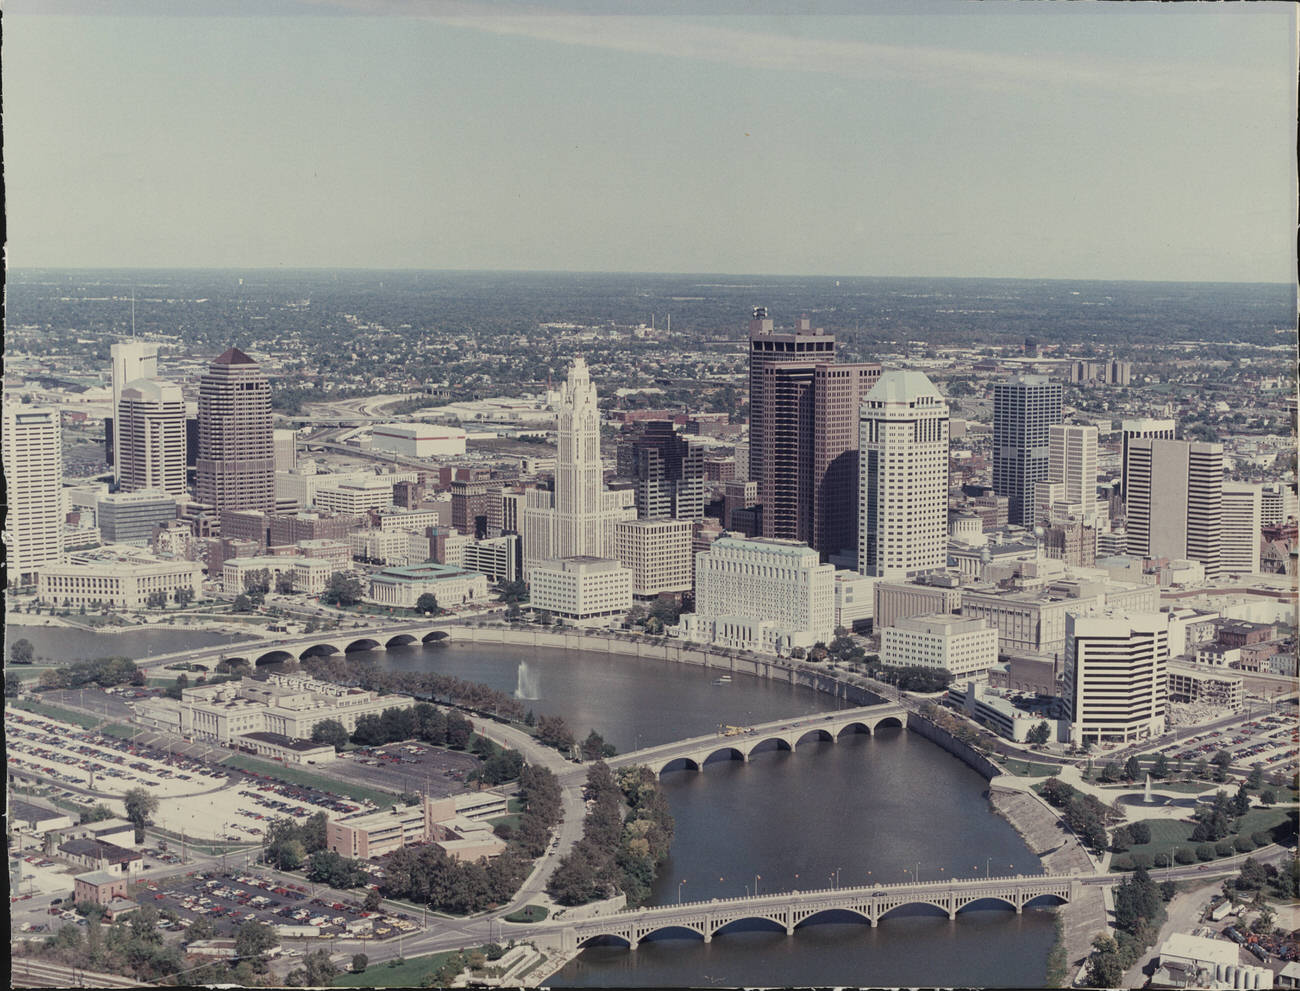 Bird's eye view of downtown Columbus including the bridges over the Scioto River, 1980s.